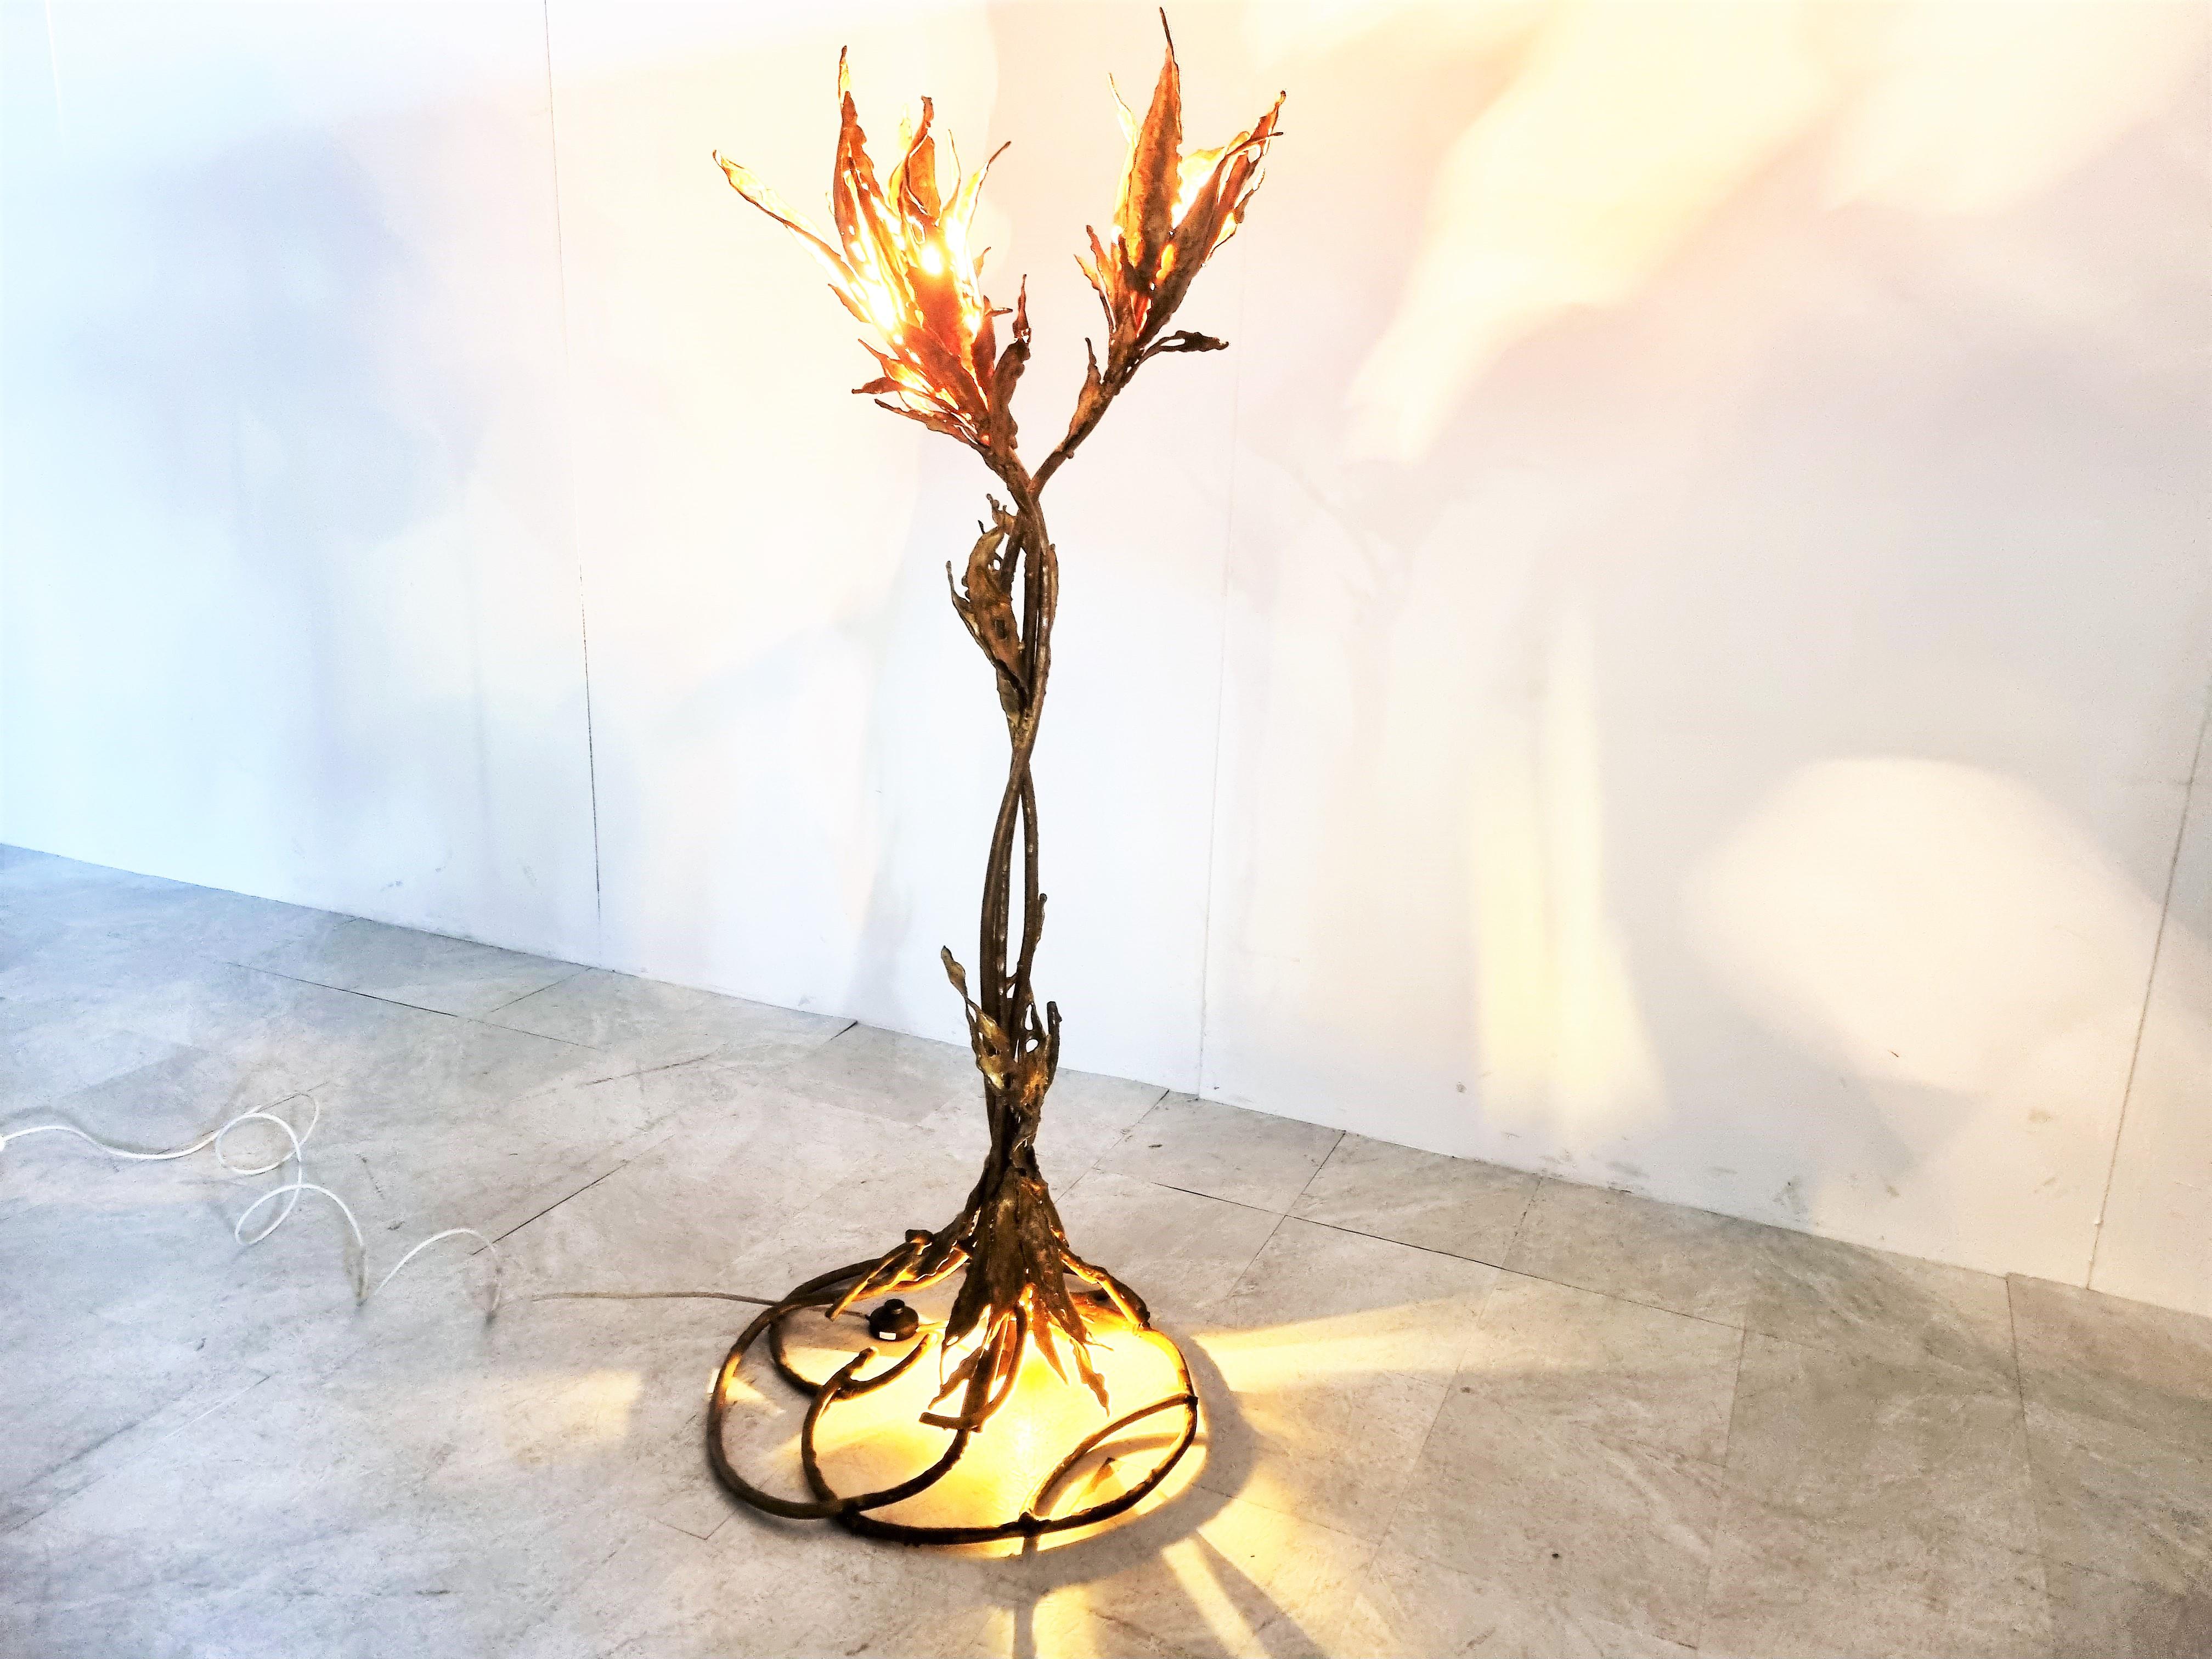 Stunning torch cut and hand made floor lamp signed by Paul Moerenhout.

He was a midcentury artist and designer and manufactured brass/bronze table lamps ,mostly natural designs, in a beautiful way.

This sculptural lamp is no exception and has